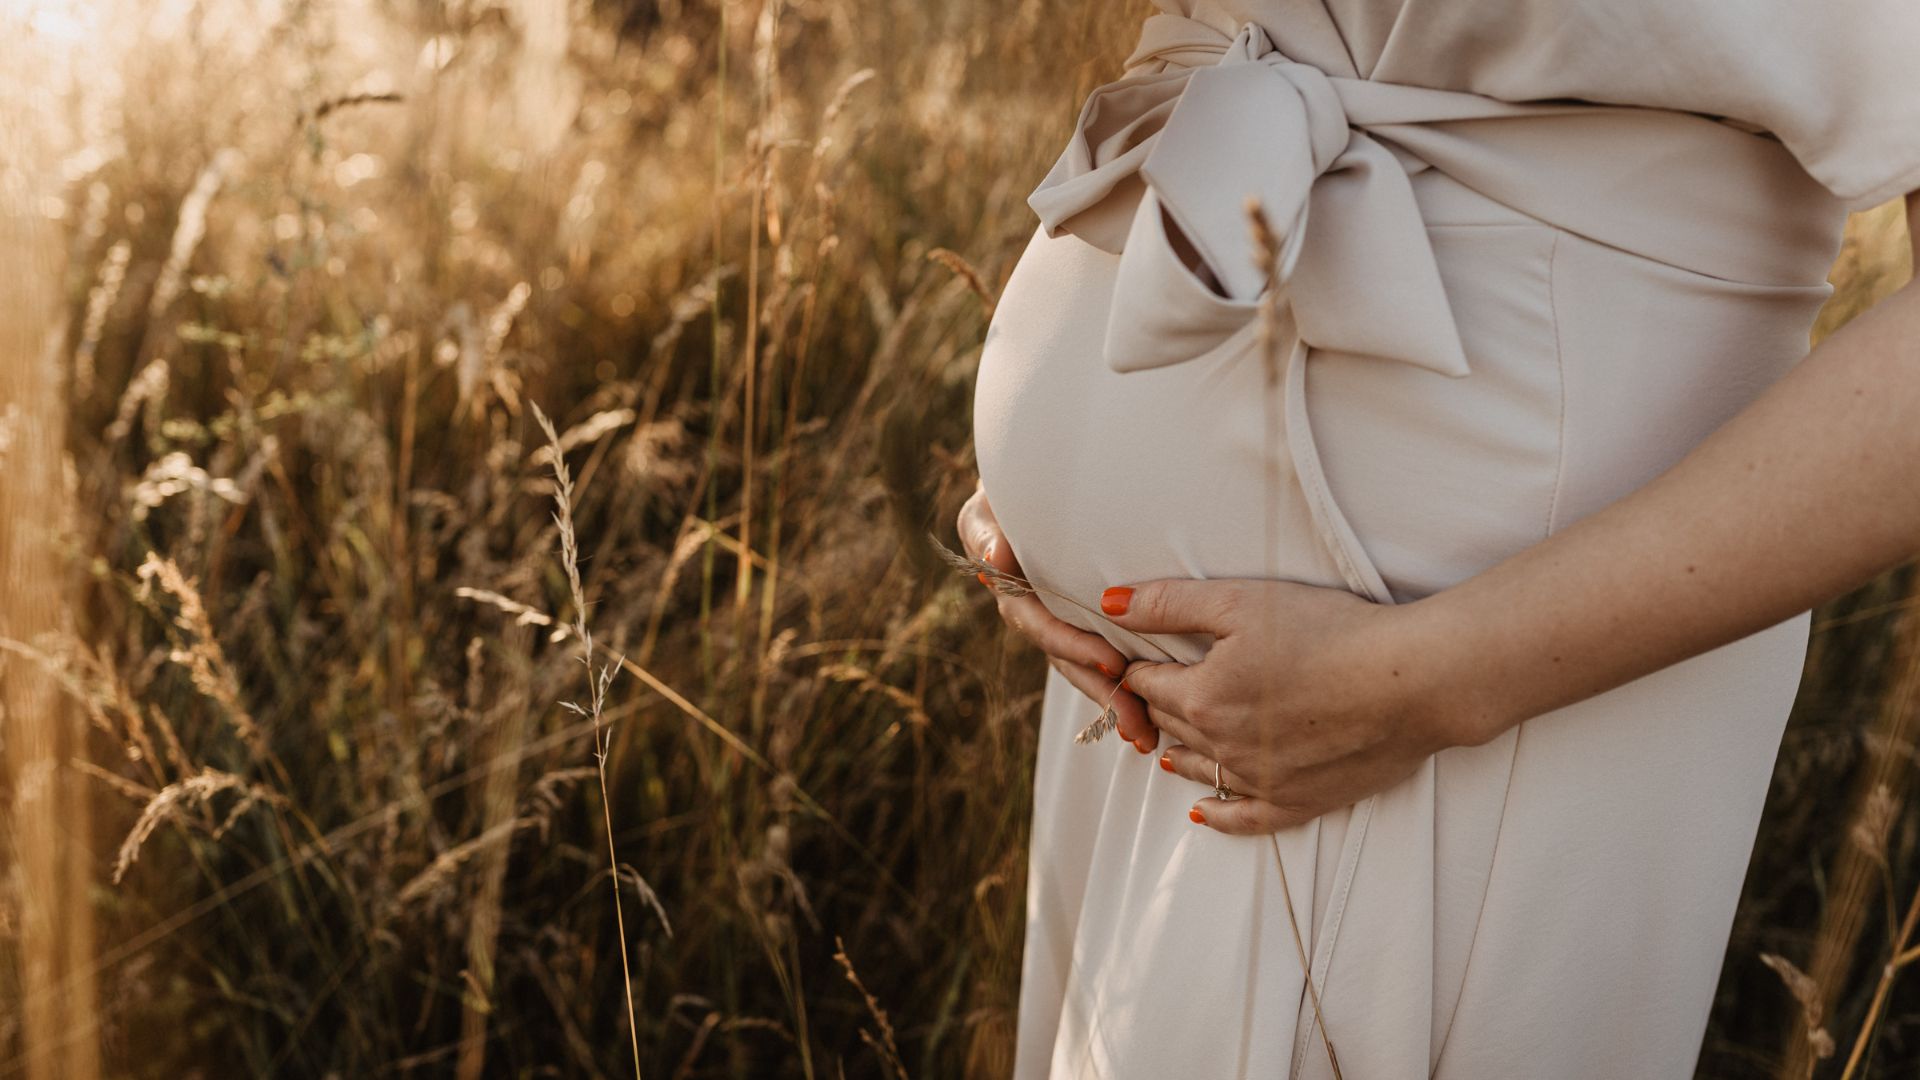 Midsummer, wedding, or party? Find the perfect maternity dress for the celebration!